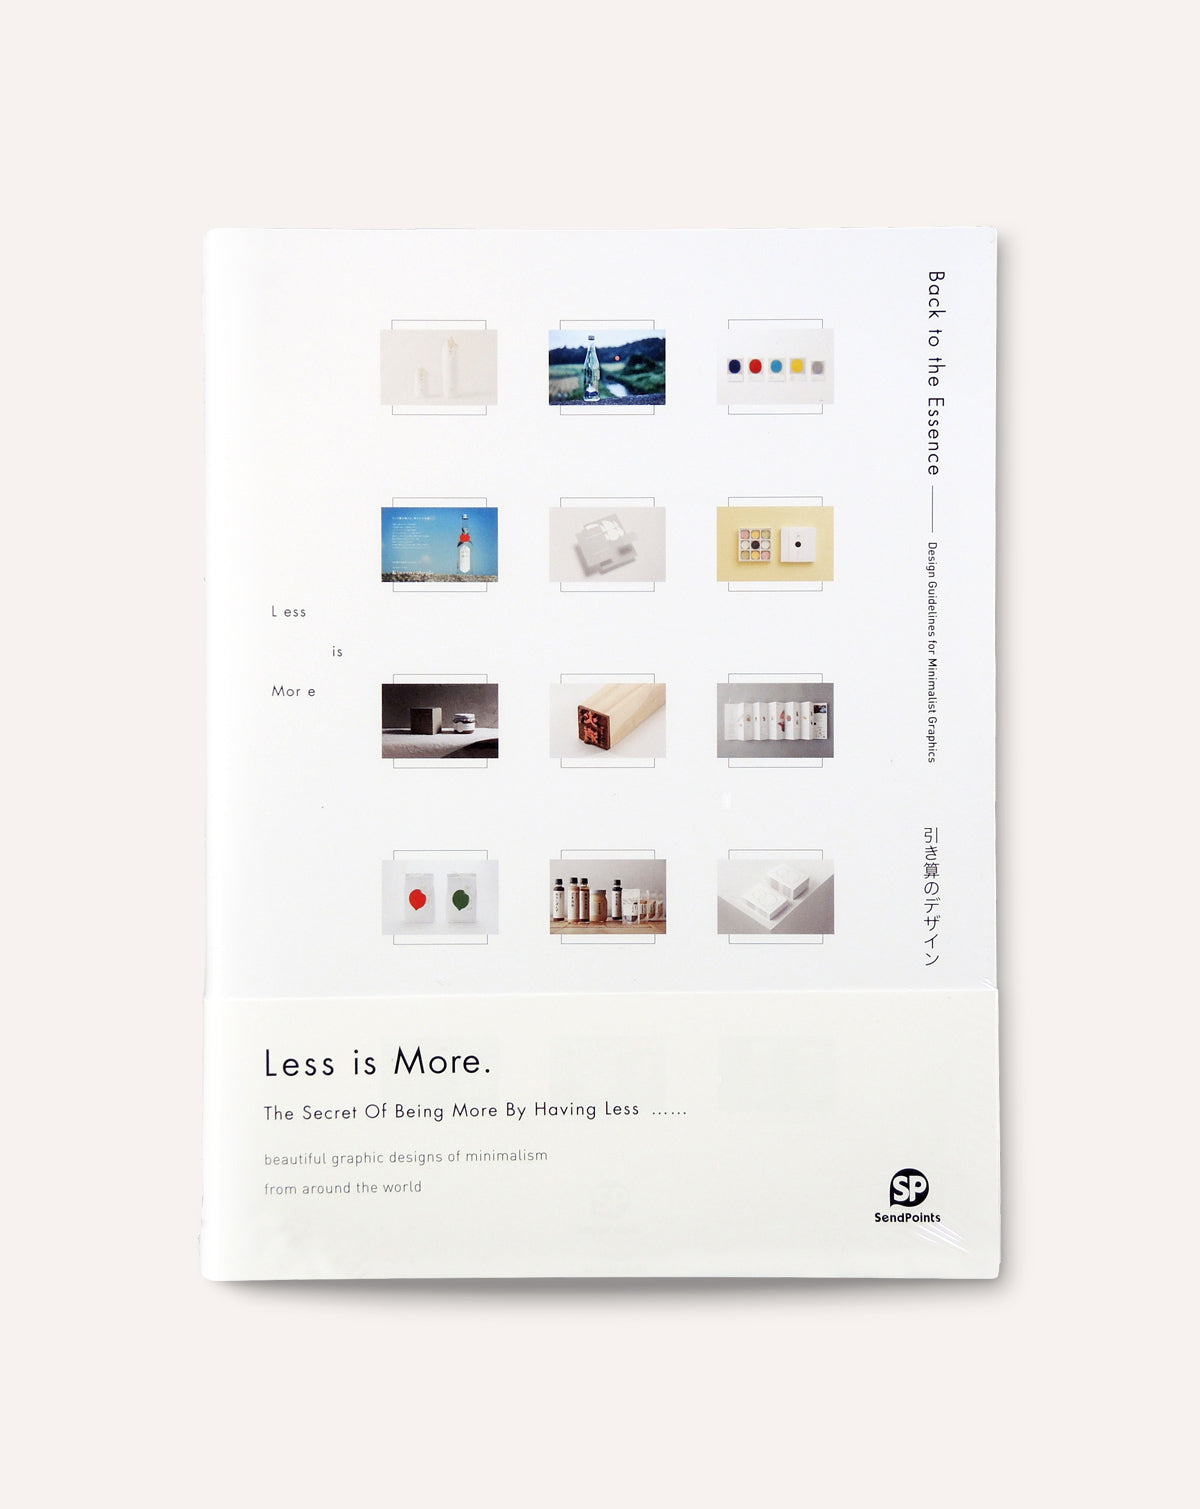 Back to the Essence: Design Guidelines for Minimalist Graphics